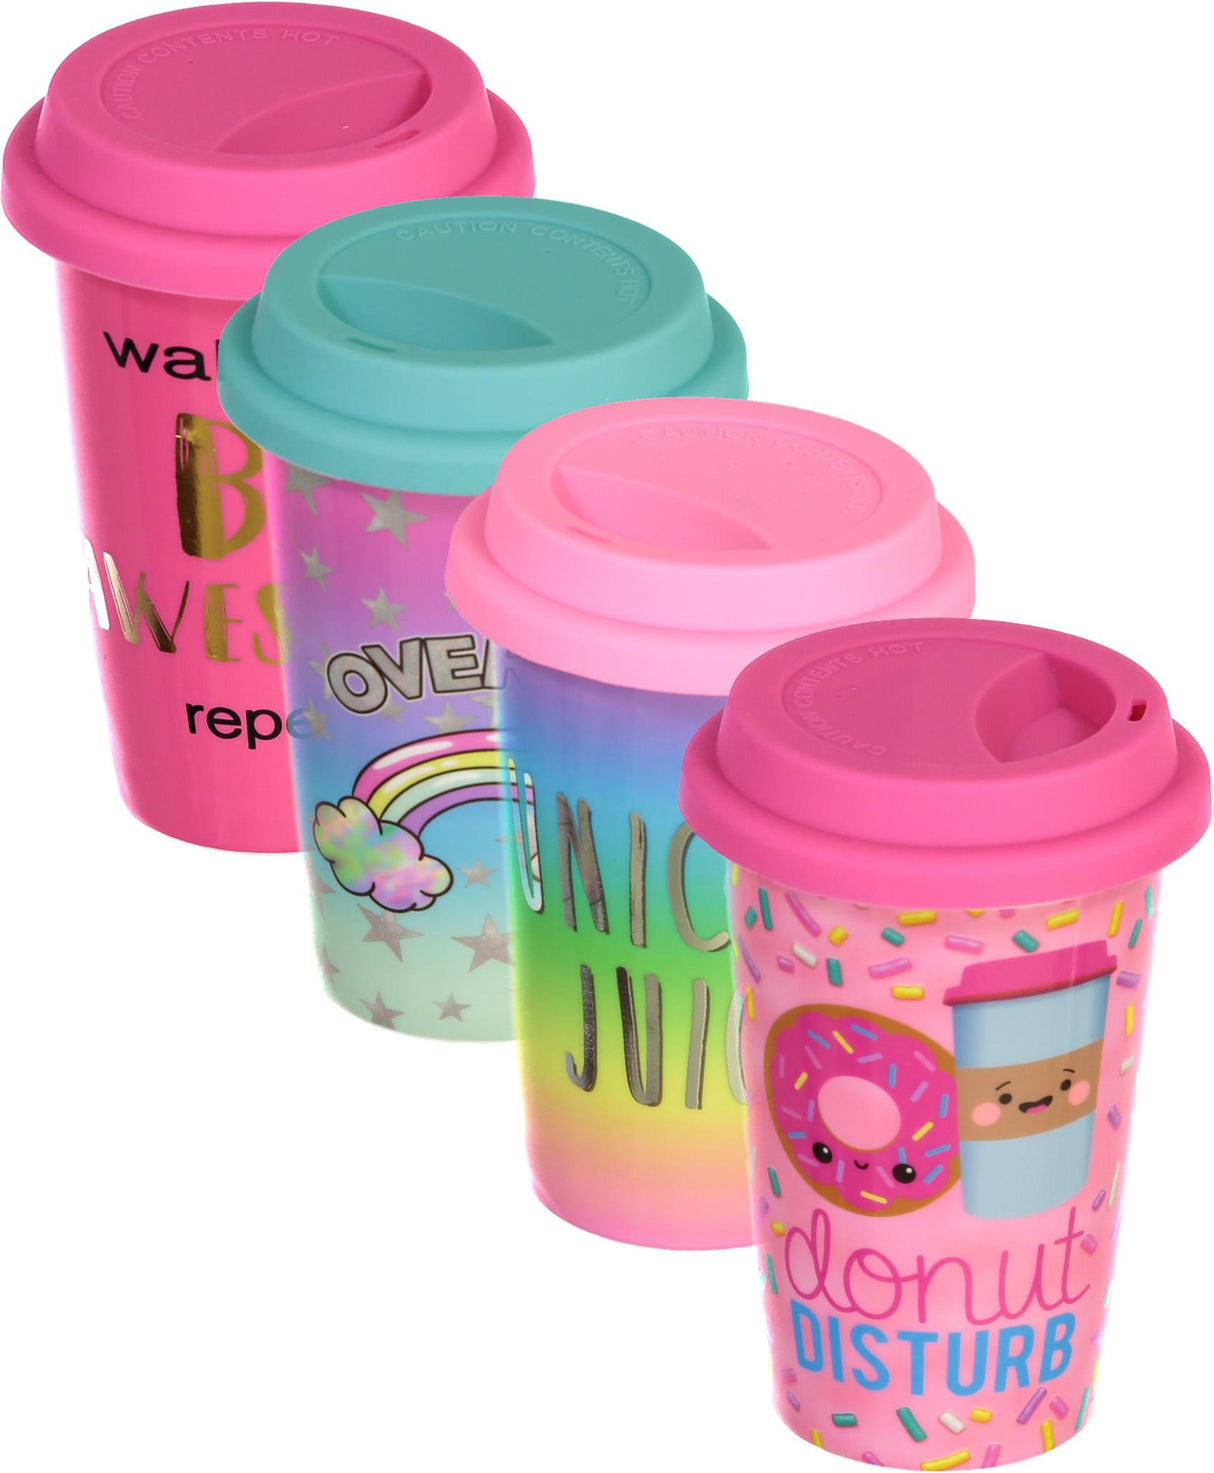 ShirtStop Ceramic Hot Cup with Silicone Lid - AND14499